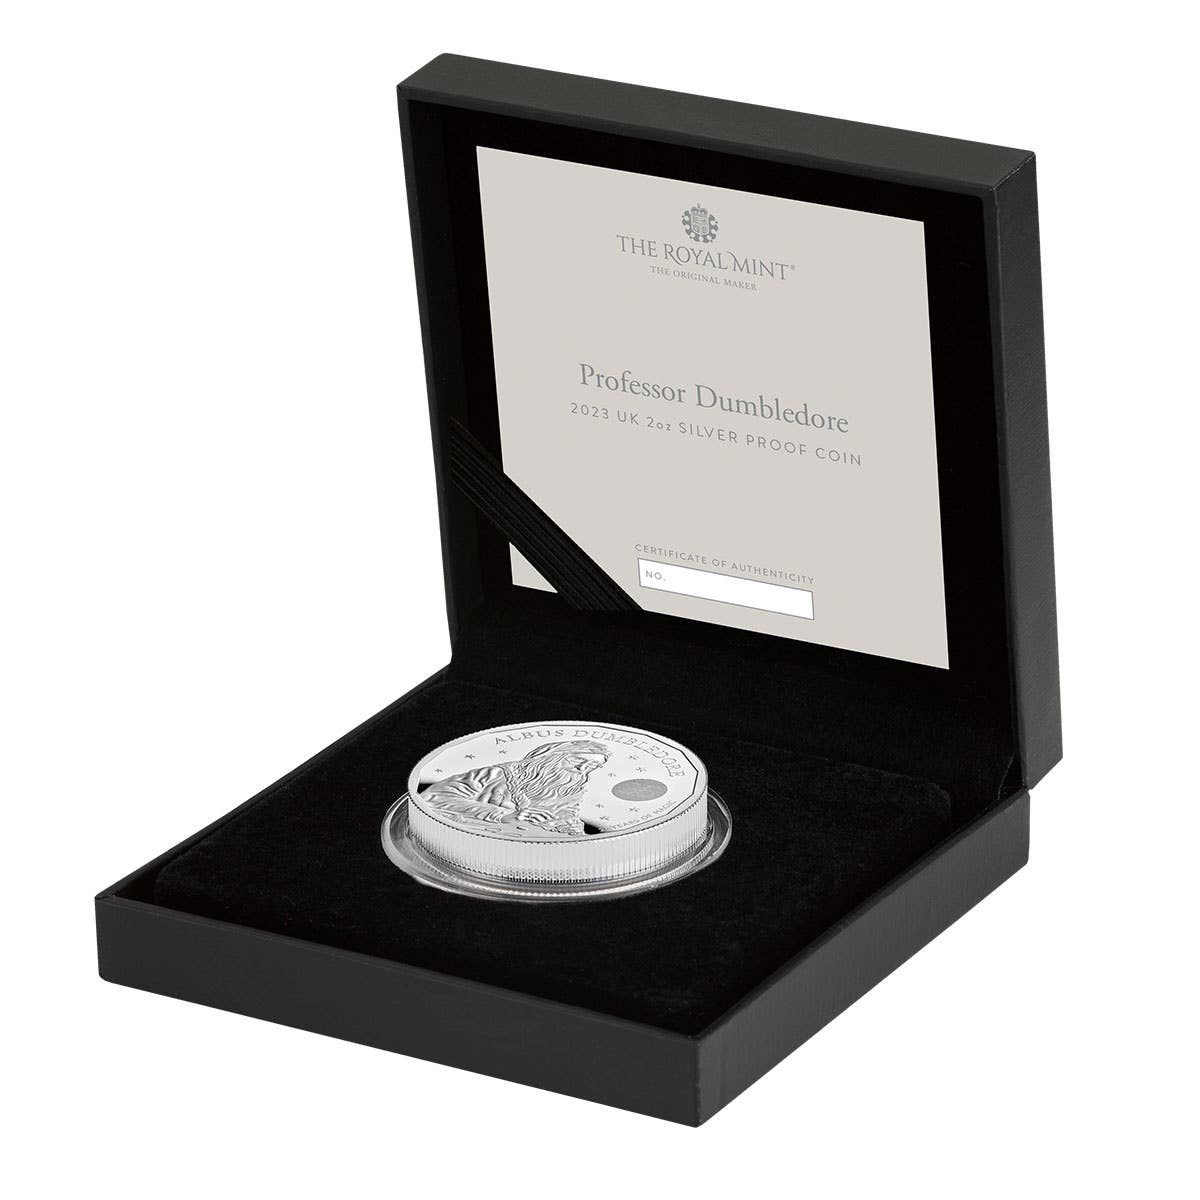 Dumbledore 2022 UK 2oz Silver Proof Coin